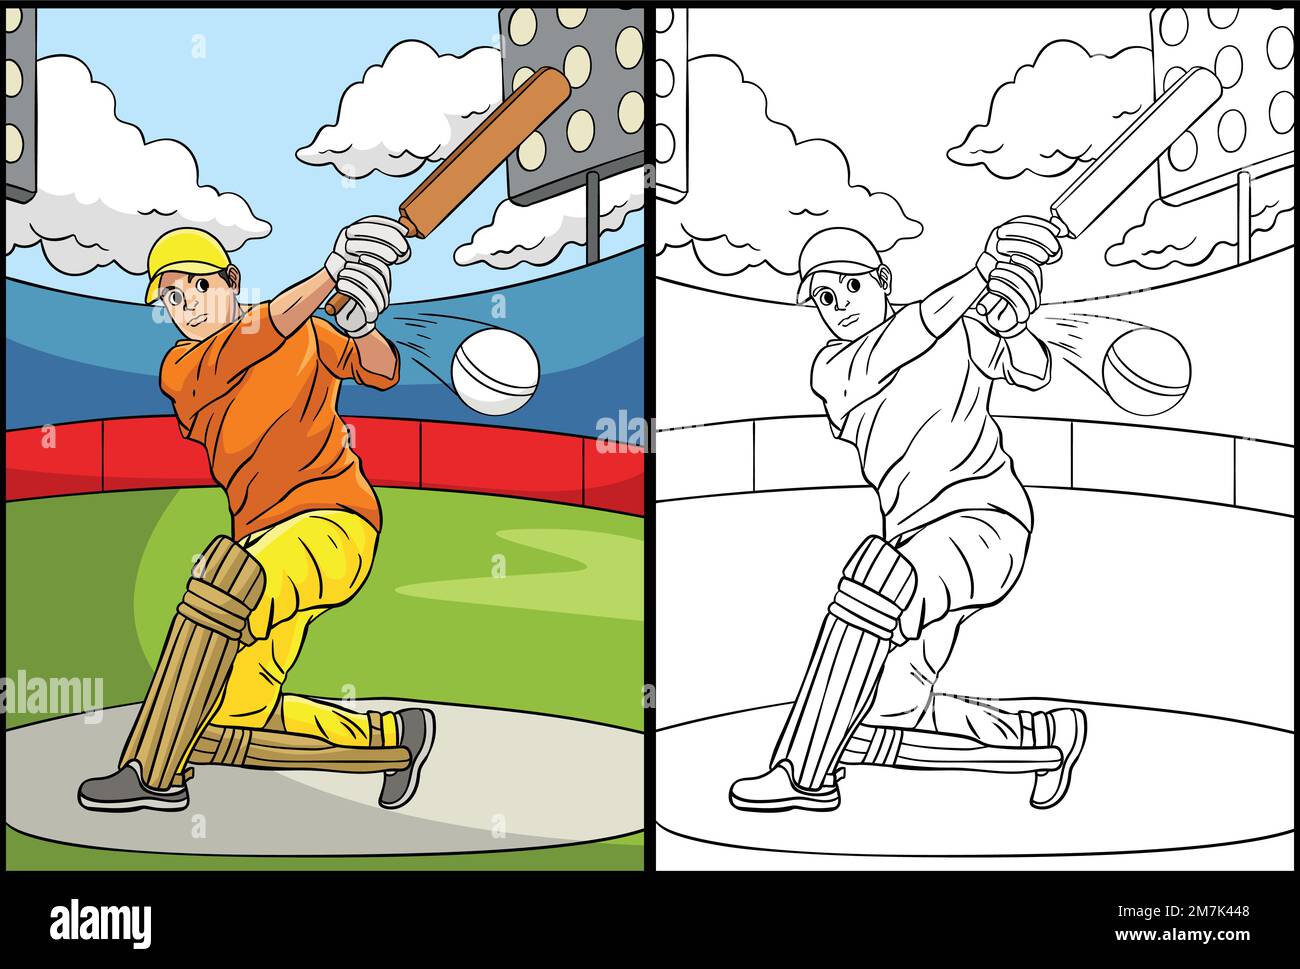 A simple sketch of the men playing cricket Vector Image